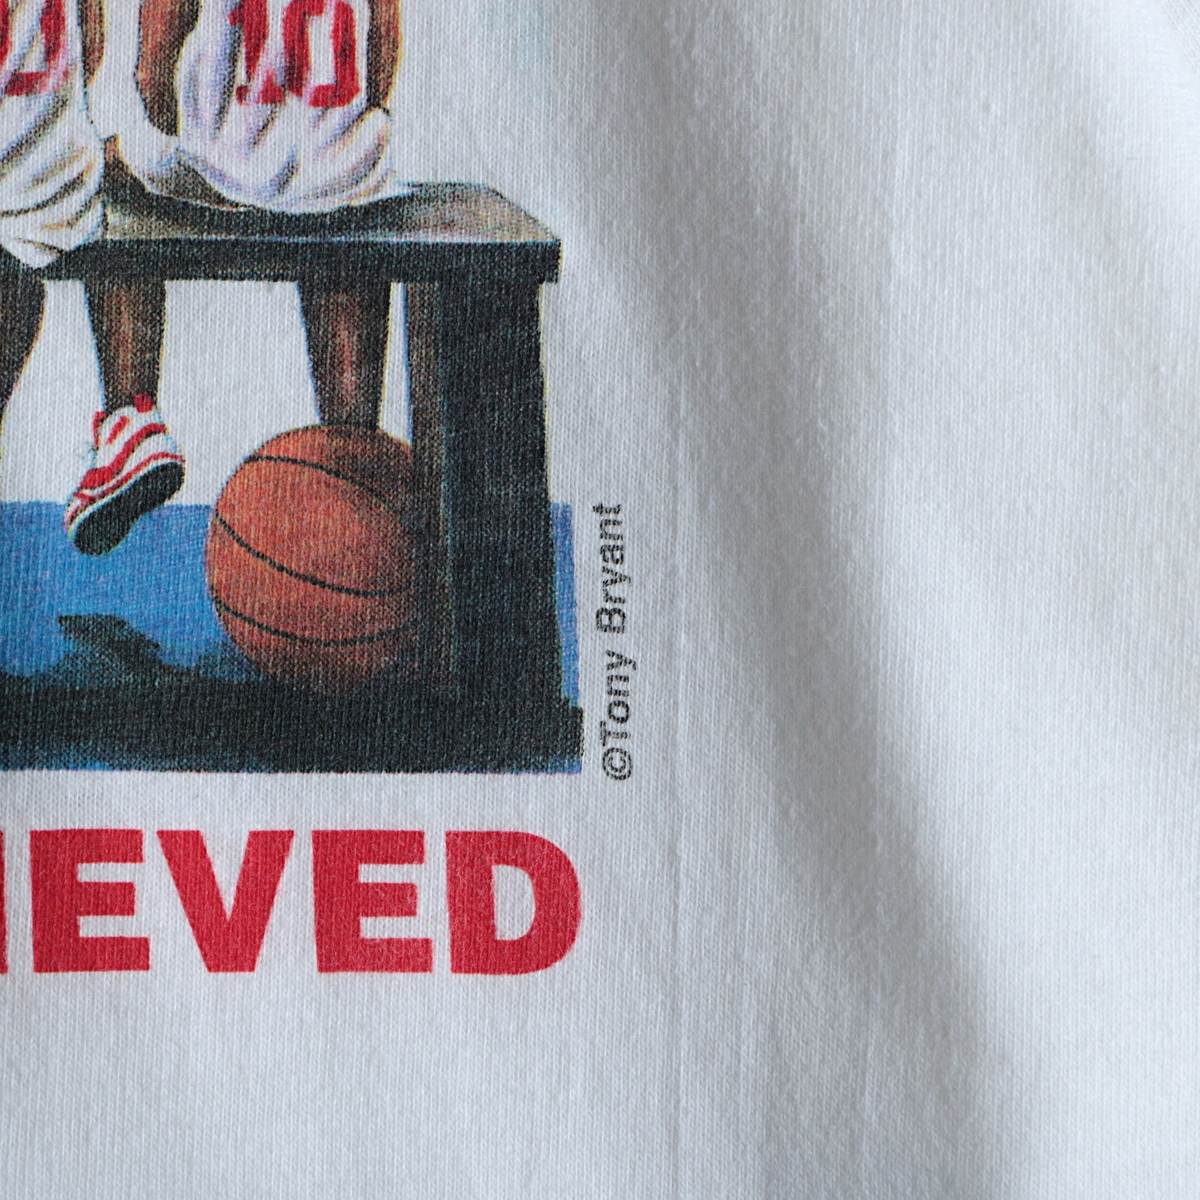 Vintage 90s Houston Rockets Basketball “They Always Believed” Shirt Large